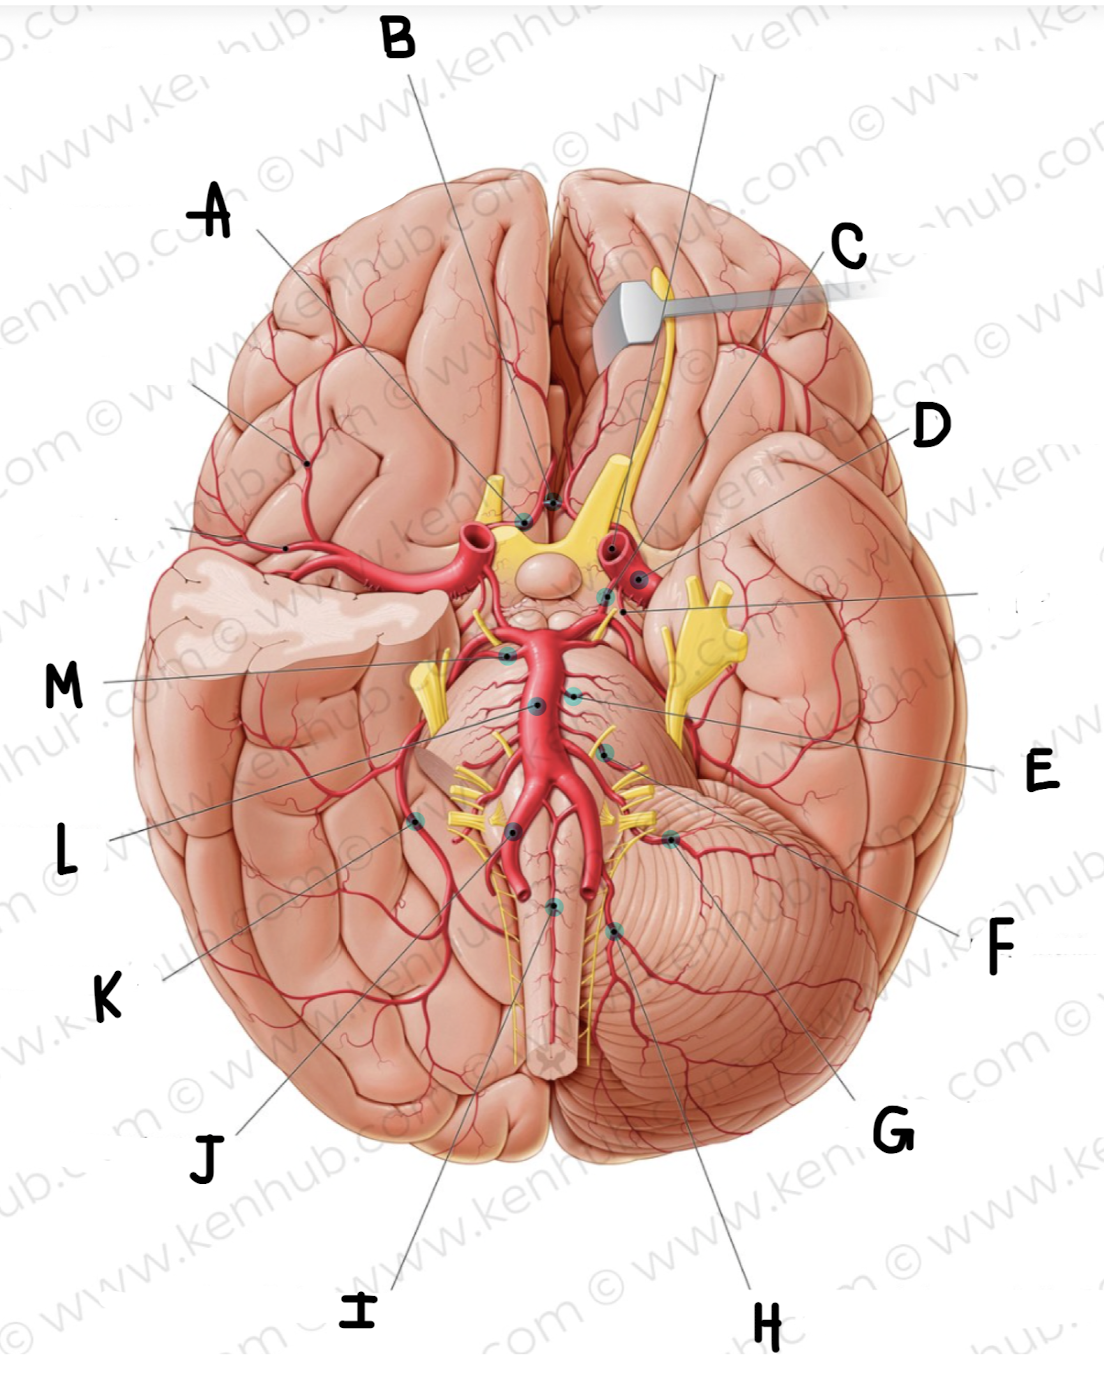 <p>What is the name of the artery labeled E?</p>